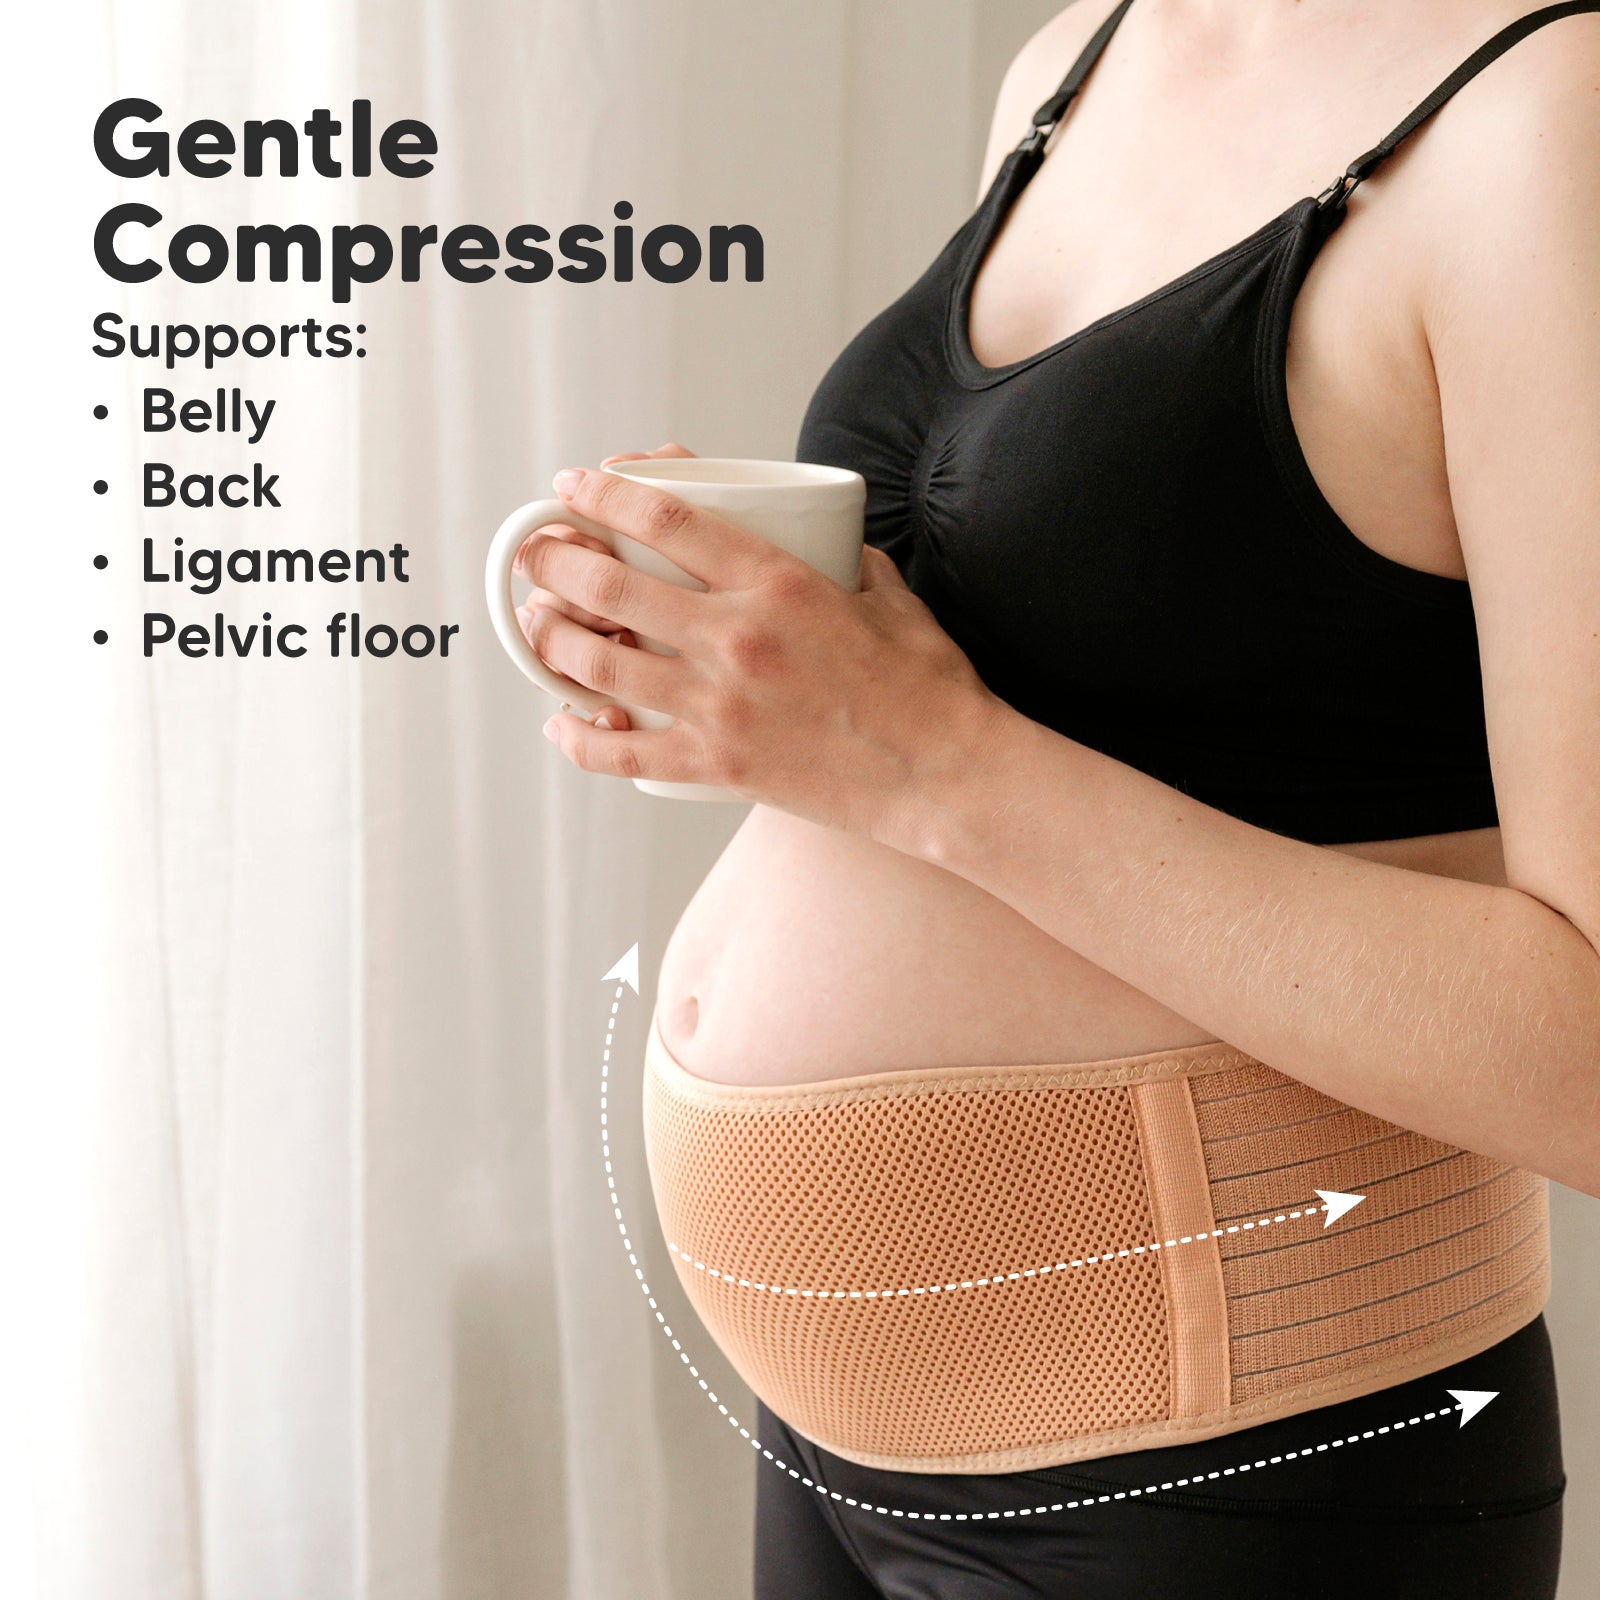 Pregnancy Belly Band Support Belt For Pains – KeaBabies